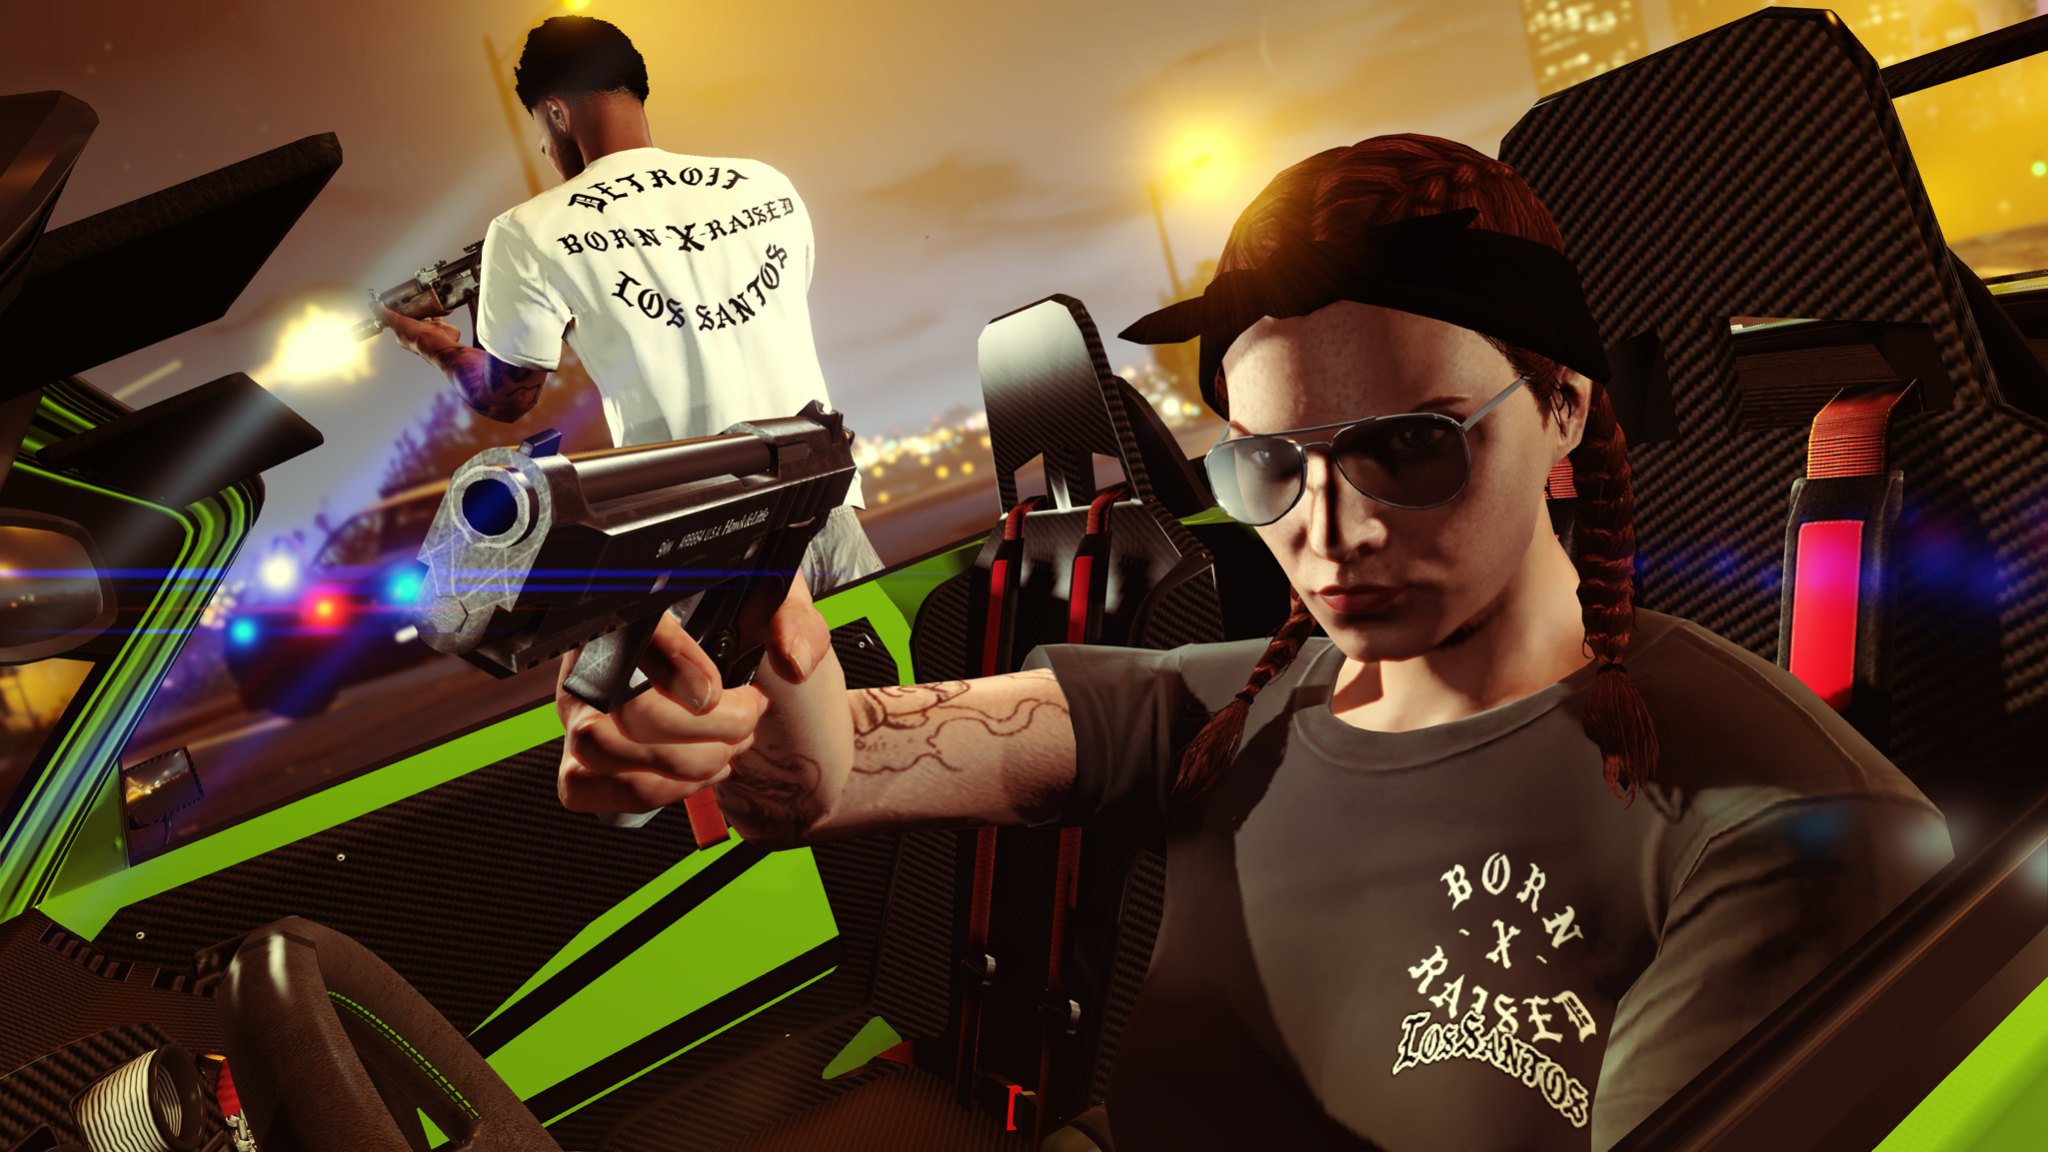 Born x Raised's streetwear is right at home in 'GTA V